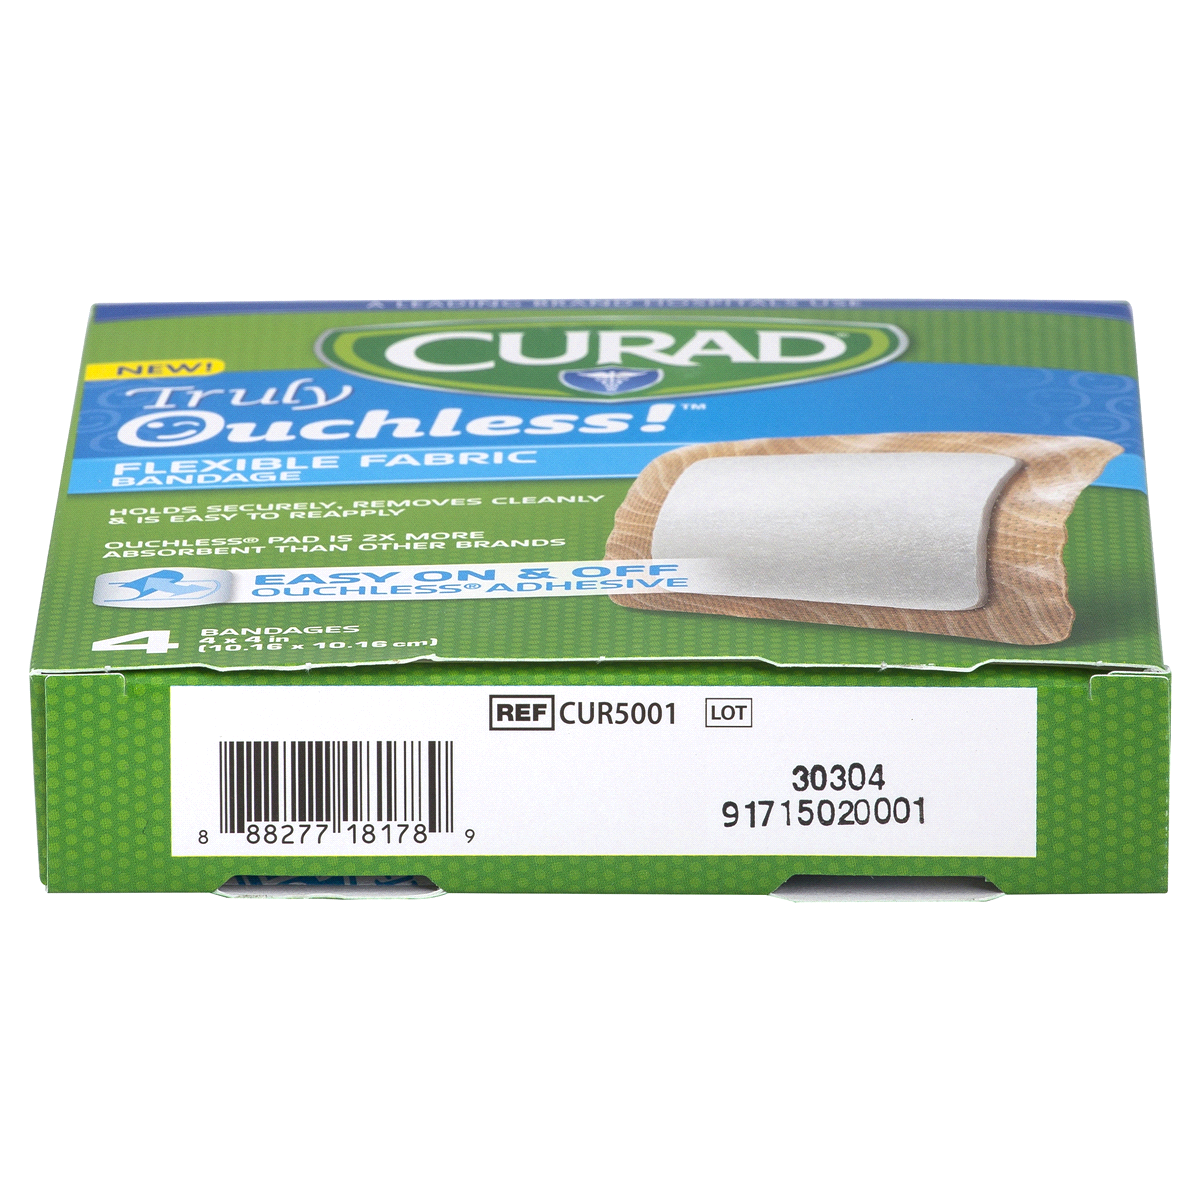 slide 5 of 5, Curad Truly Ouchless Flexible Fabric Bandage, 4 - 4 in x 4 in, 4 ct